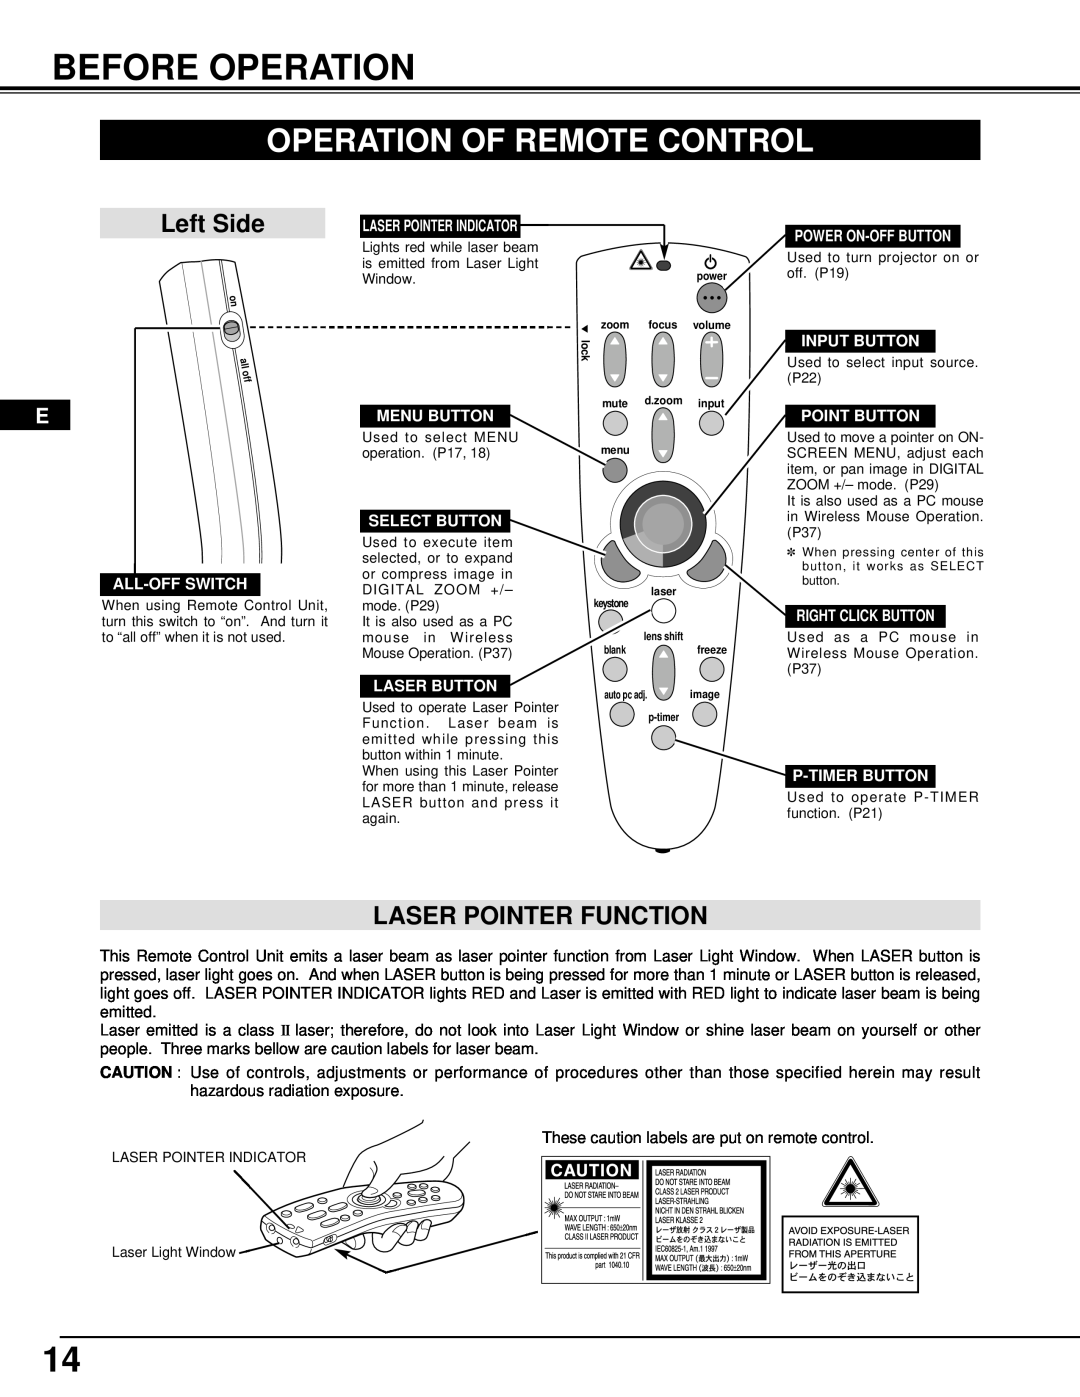 InFocus DP9295 manual Before Operation, Operation Of Remote Control, Left Side, Laser Pointer Function 